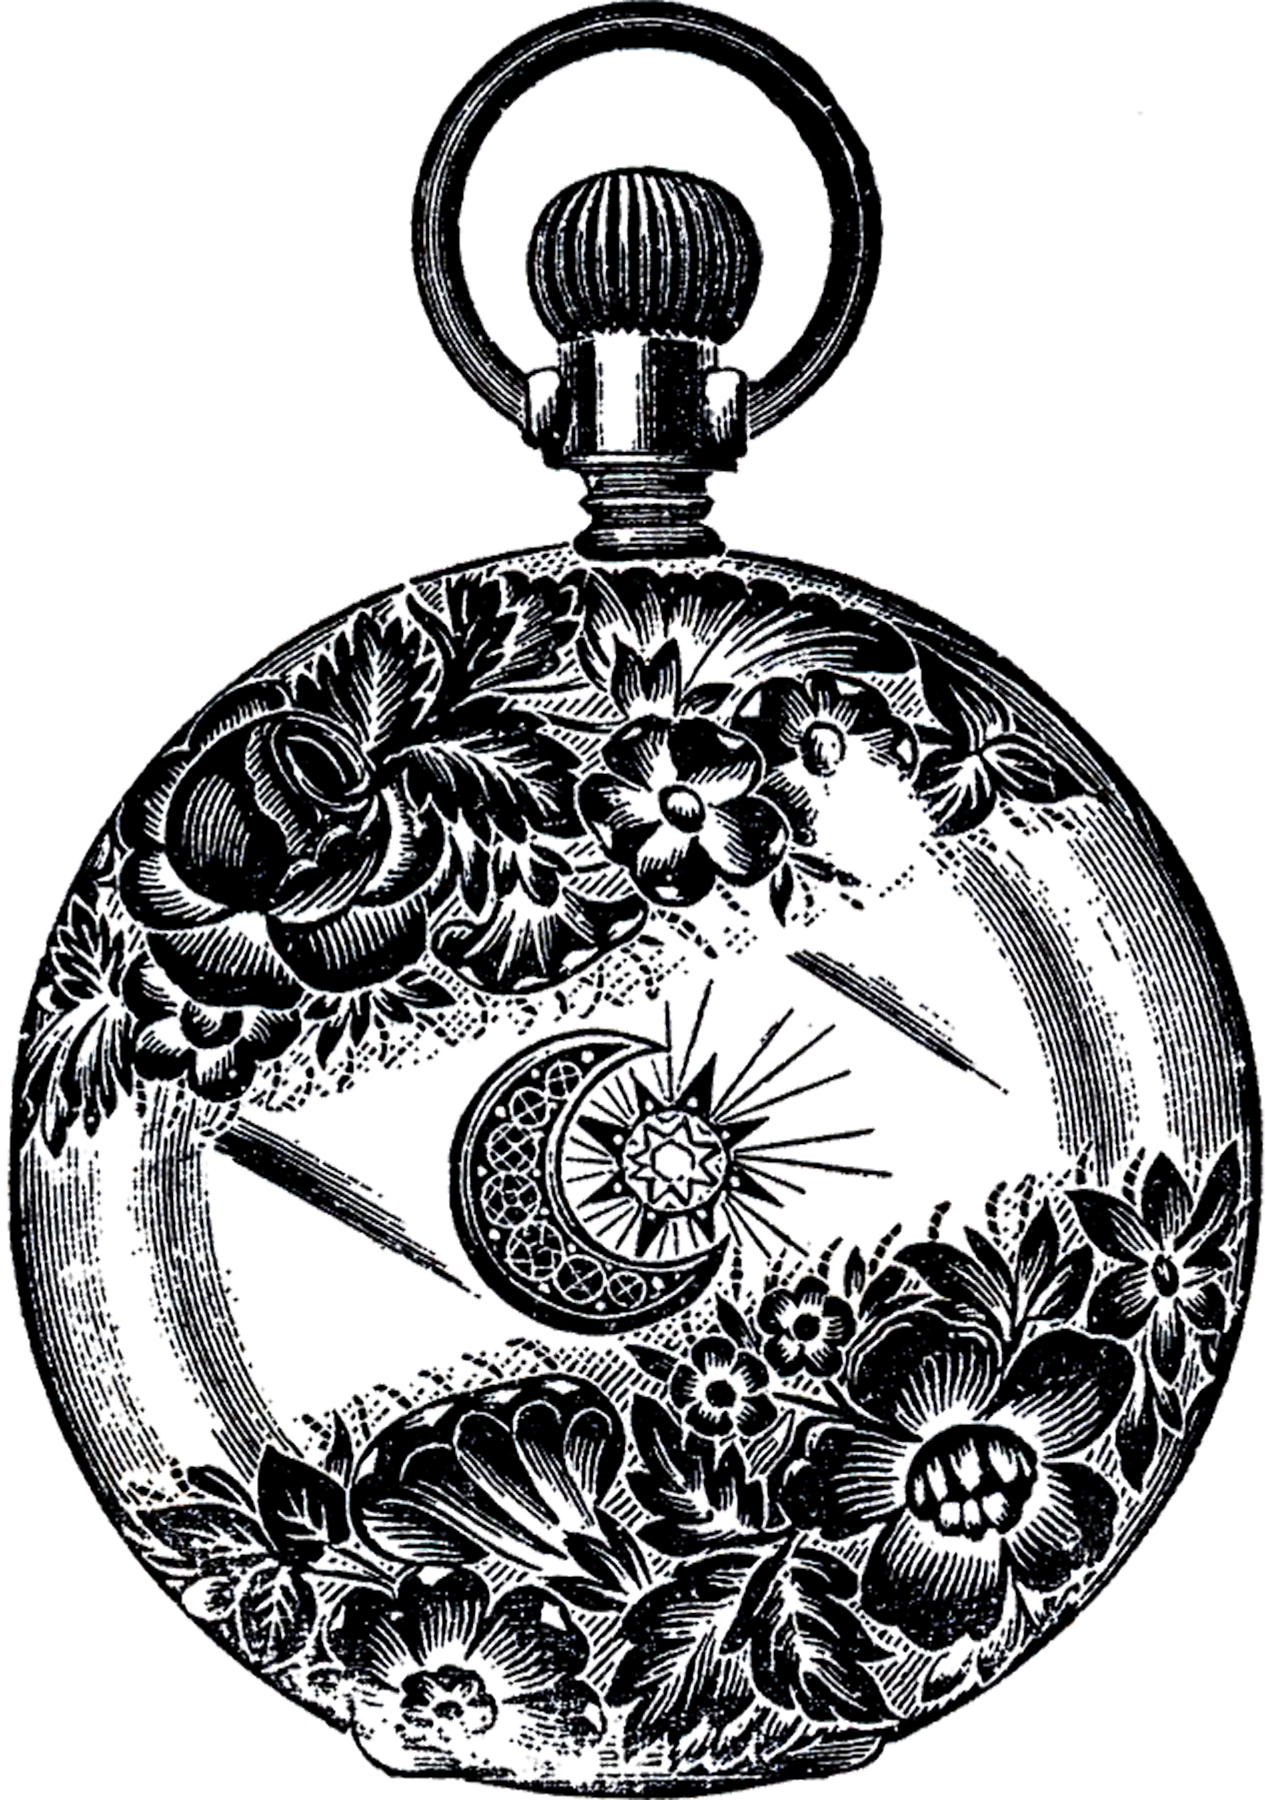 exploding pocket watch drawing